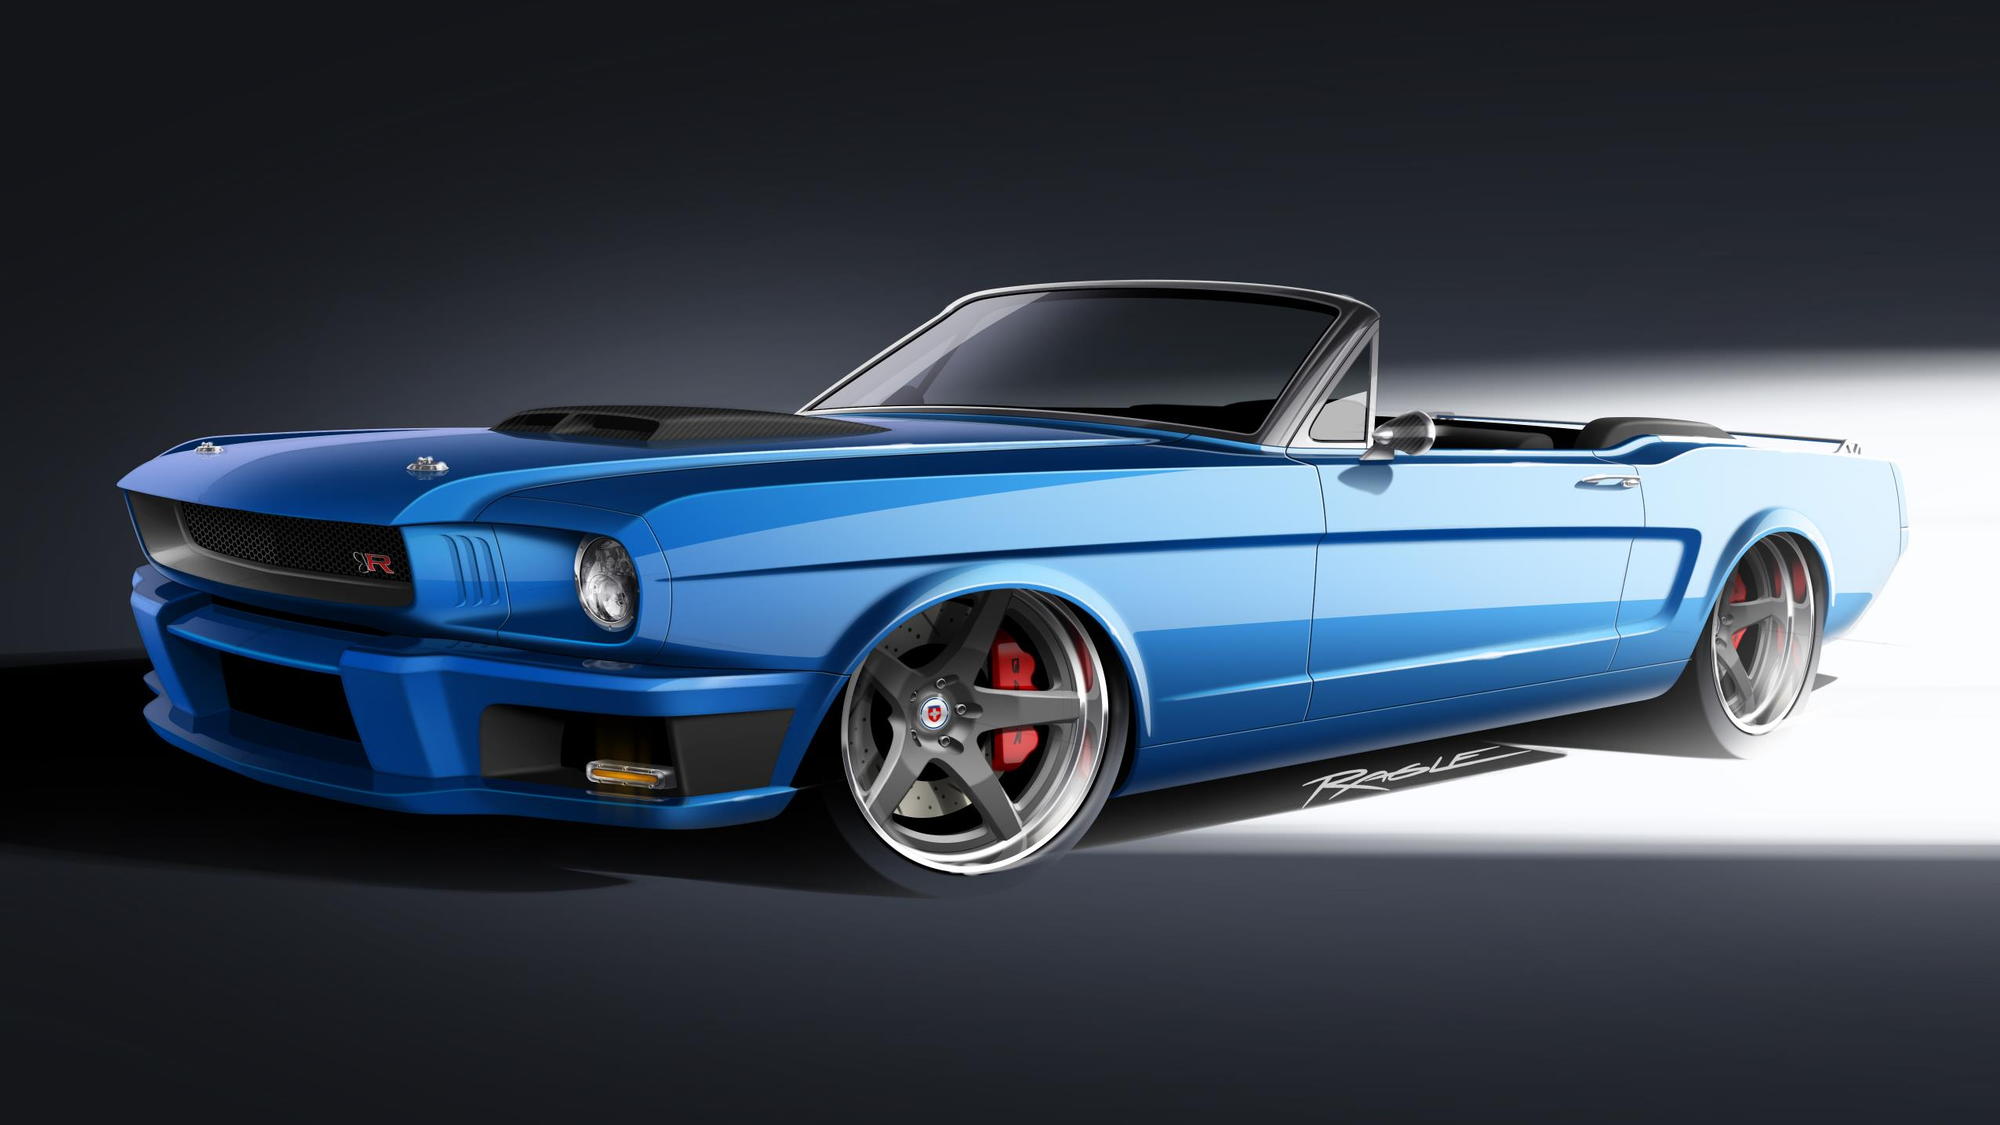 The Ringbrothers 1965 Ballistic Mustang